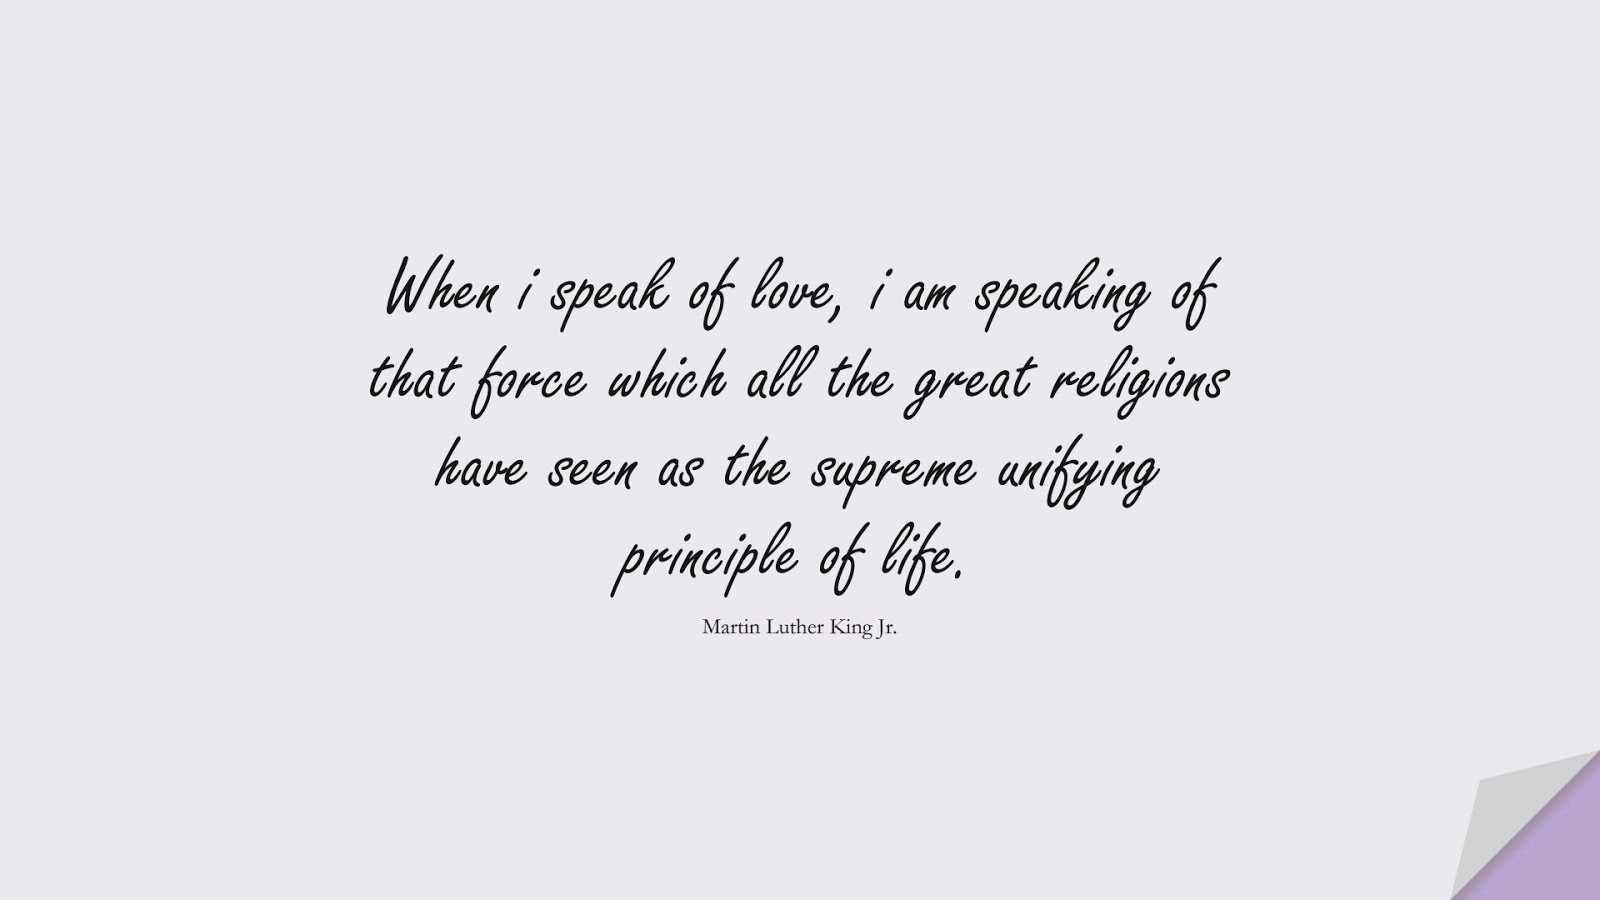 When i speak of love, i am speaking of that force which all the great religions have seen as the supreme unifying principle of life. (Martin Luther King Jr.);  #MartinLutherKingJrQuotes